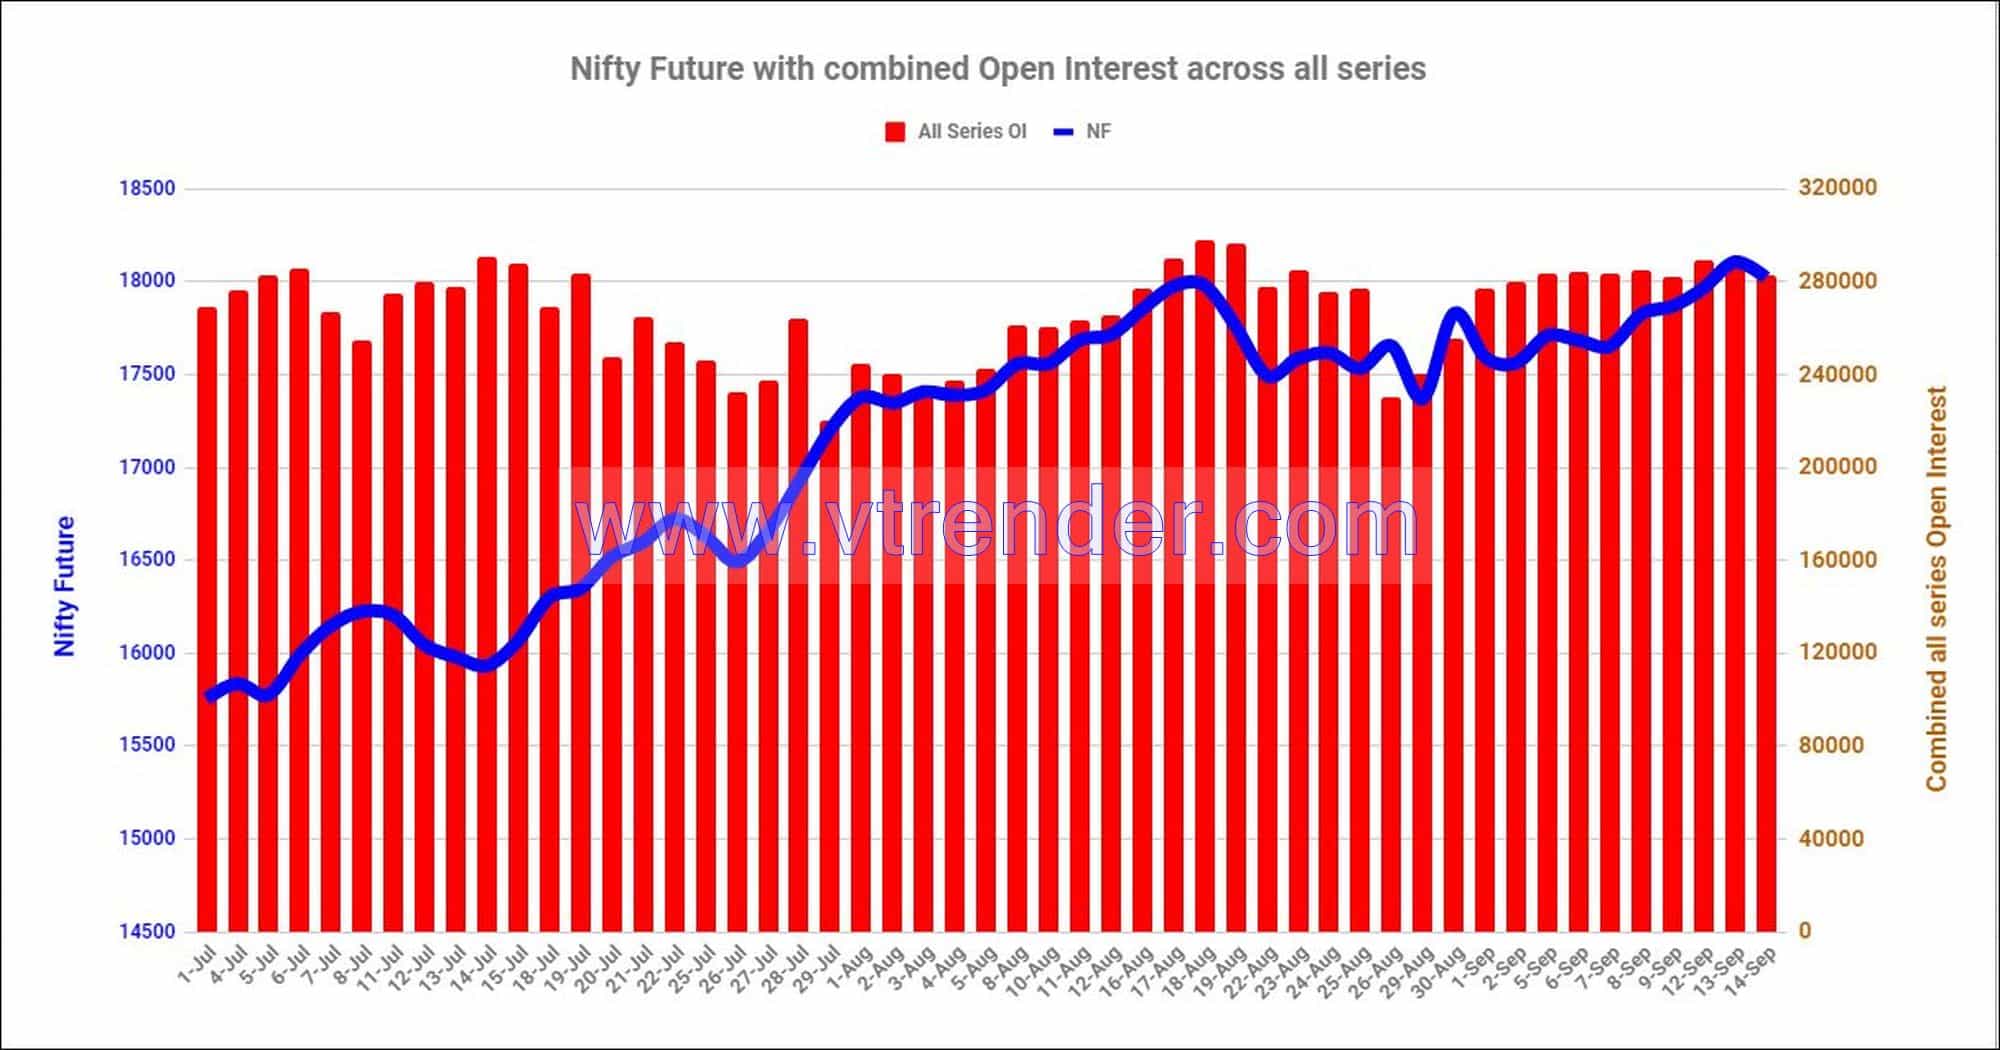 Nf14Sep Nifty And Banknifty Futures With All Series Combined Open Interest – 14Th Sep 2022 Banknifty, Nifty, Open Interest